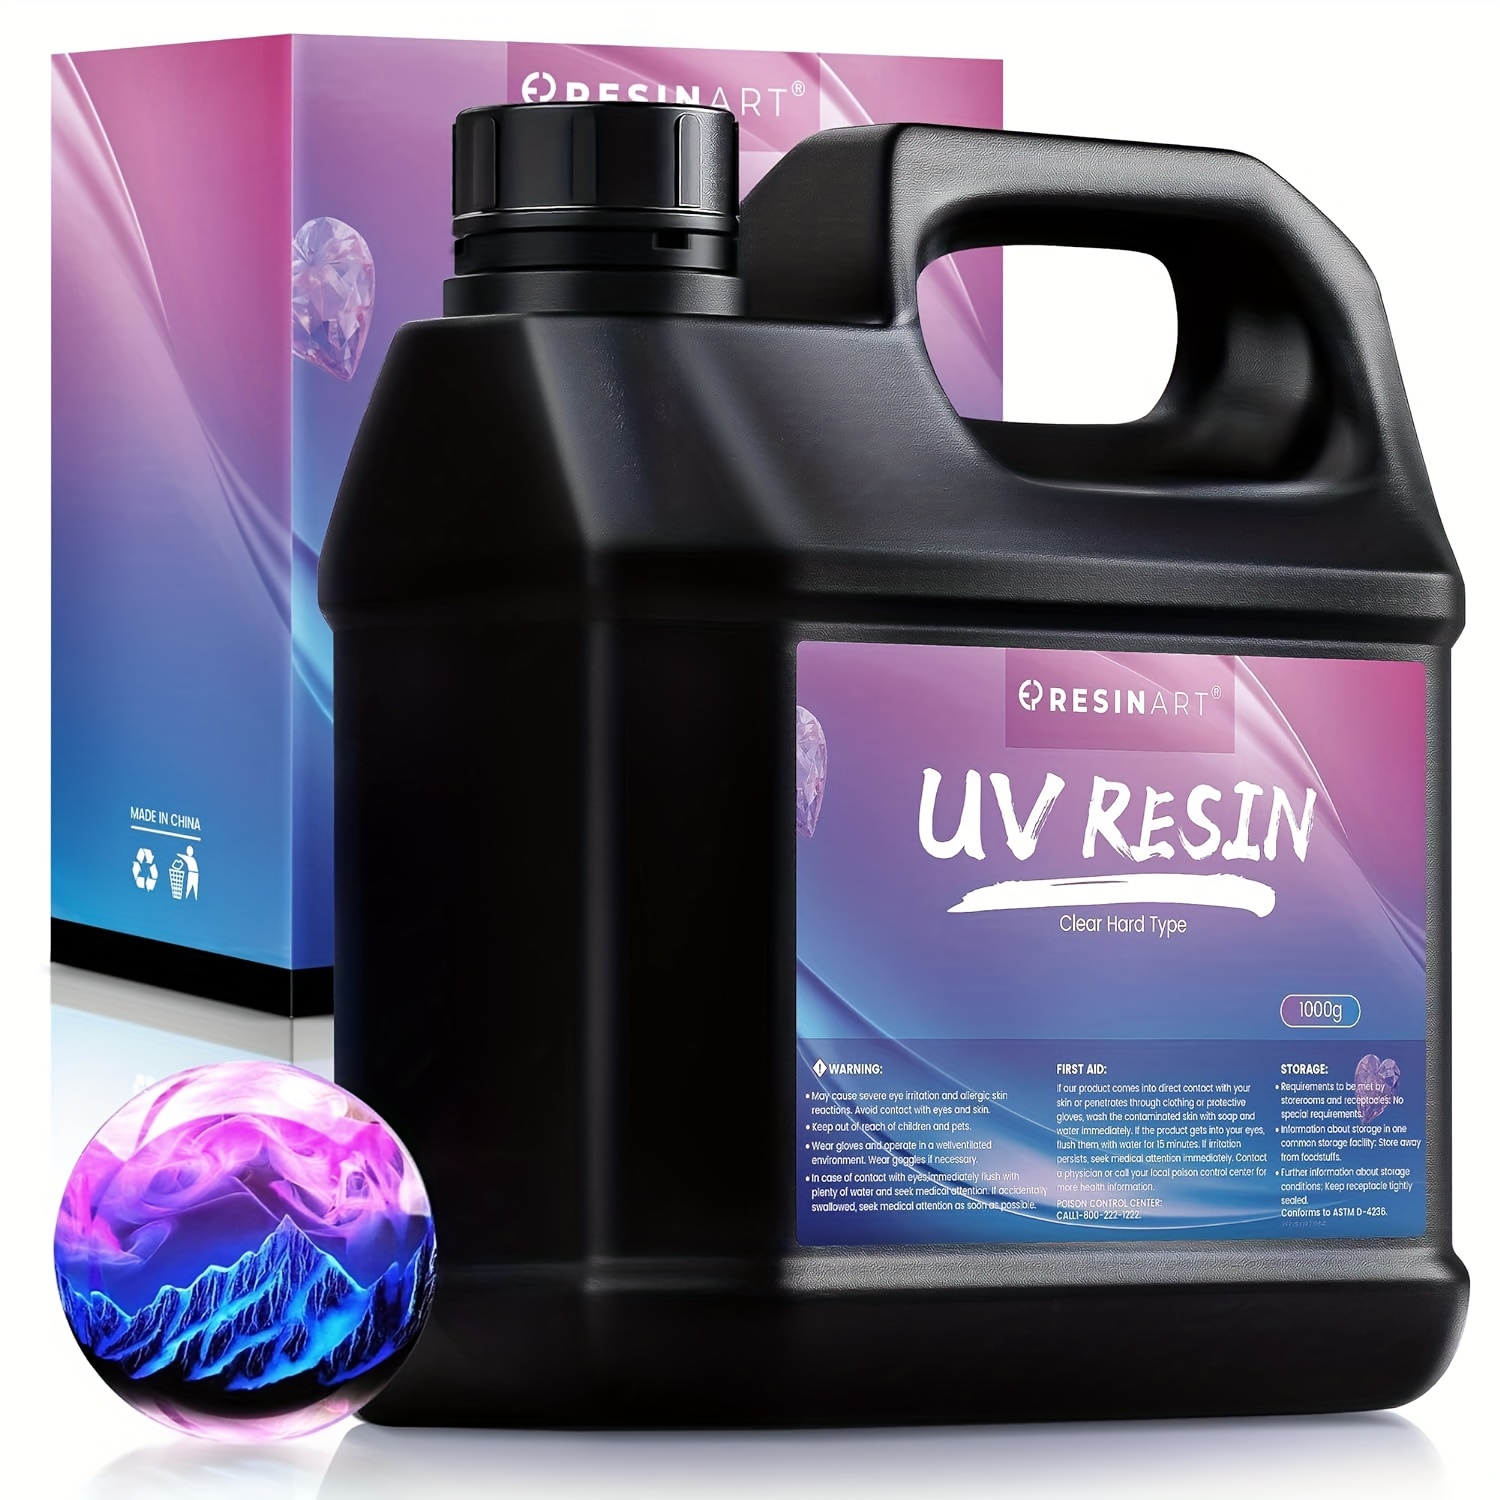 

Uv Resin 1000g, Upgrade Crystal Clear Hard Ultraviolet Epoxy Resin Glue, Low Odor Transparent Solar Cure Sunlight Activated Resin For Jewelry Making, Diy Craft Decoration, Mold, Casting And Coating